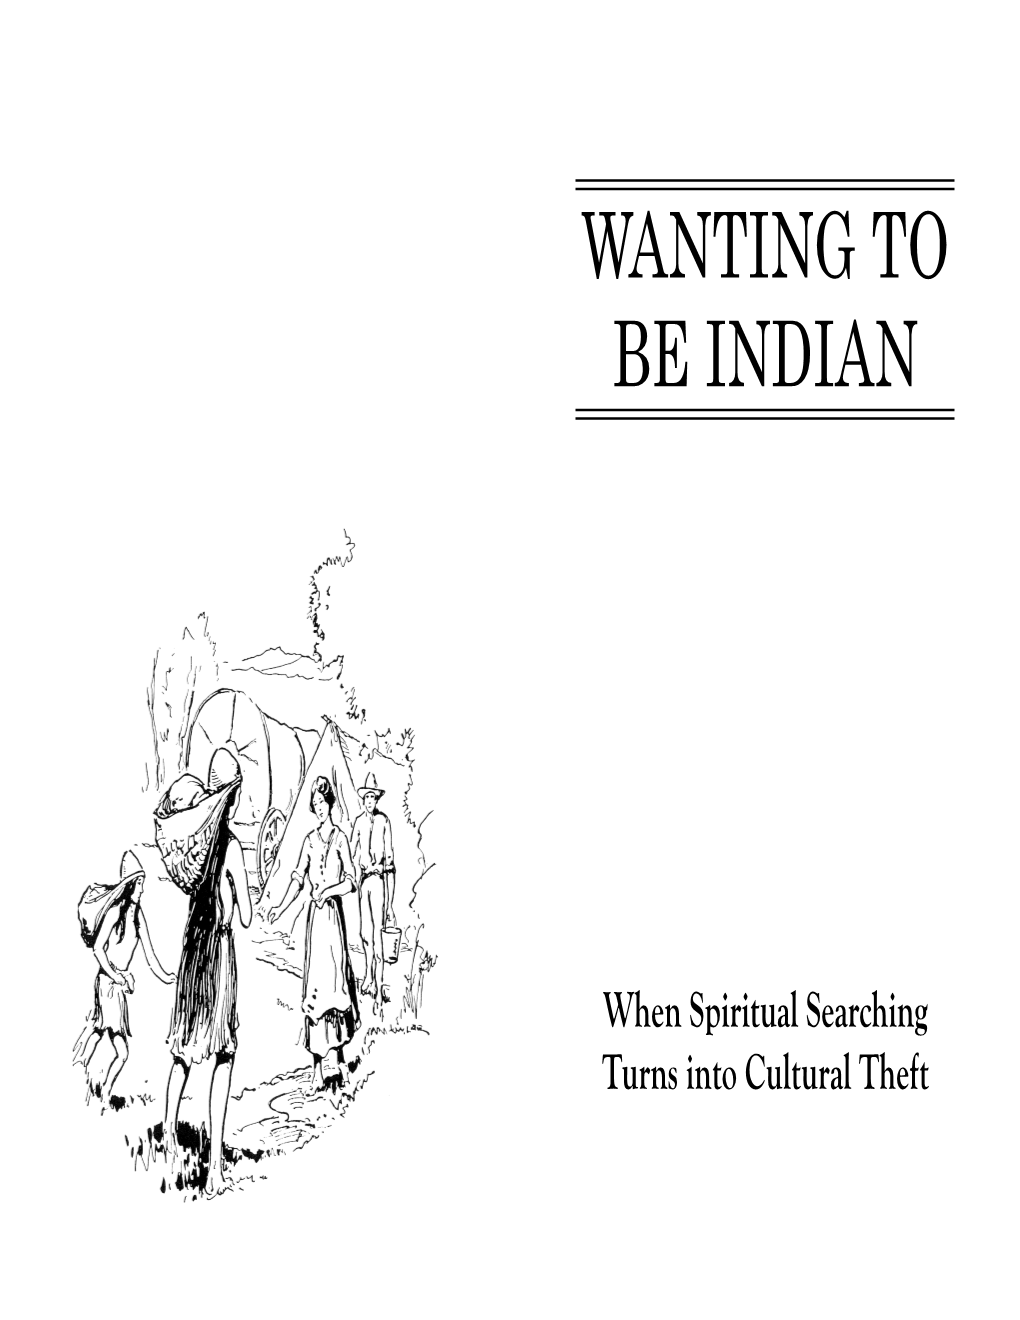 WANTING to BE INDIAN: 1 What Is at Work Here Which Makes Sincere Spiritual Searching an Searching Spiritual Sincere Makes Which Here Work at Is What